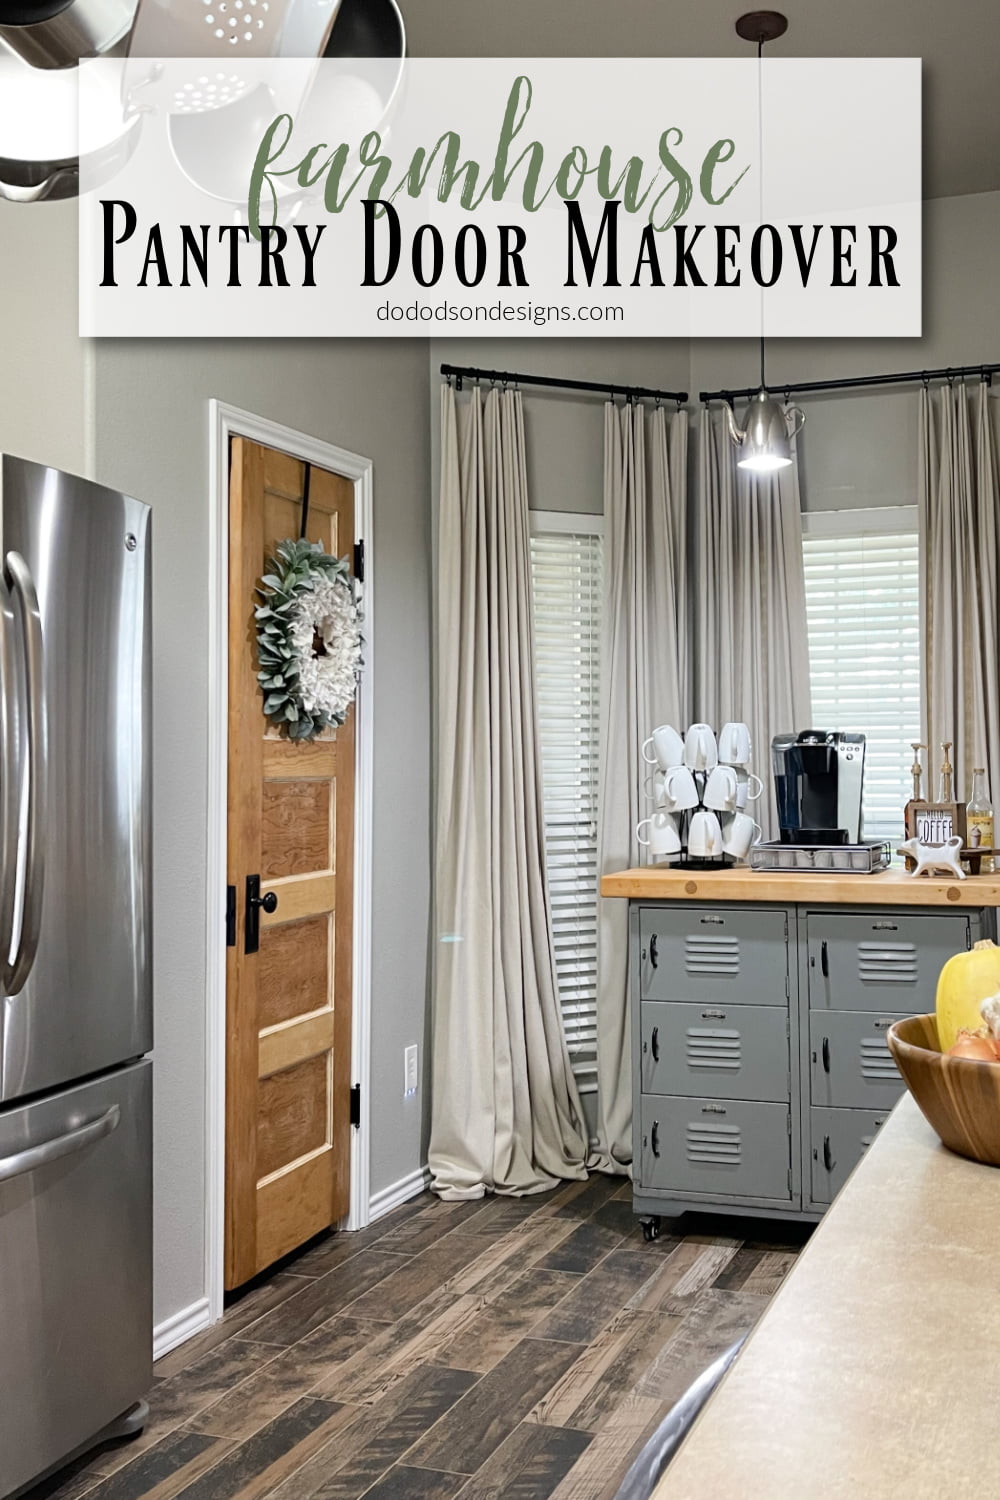 How I Made My Pantry Door Makeover Stand Out -Tutorial